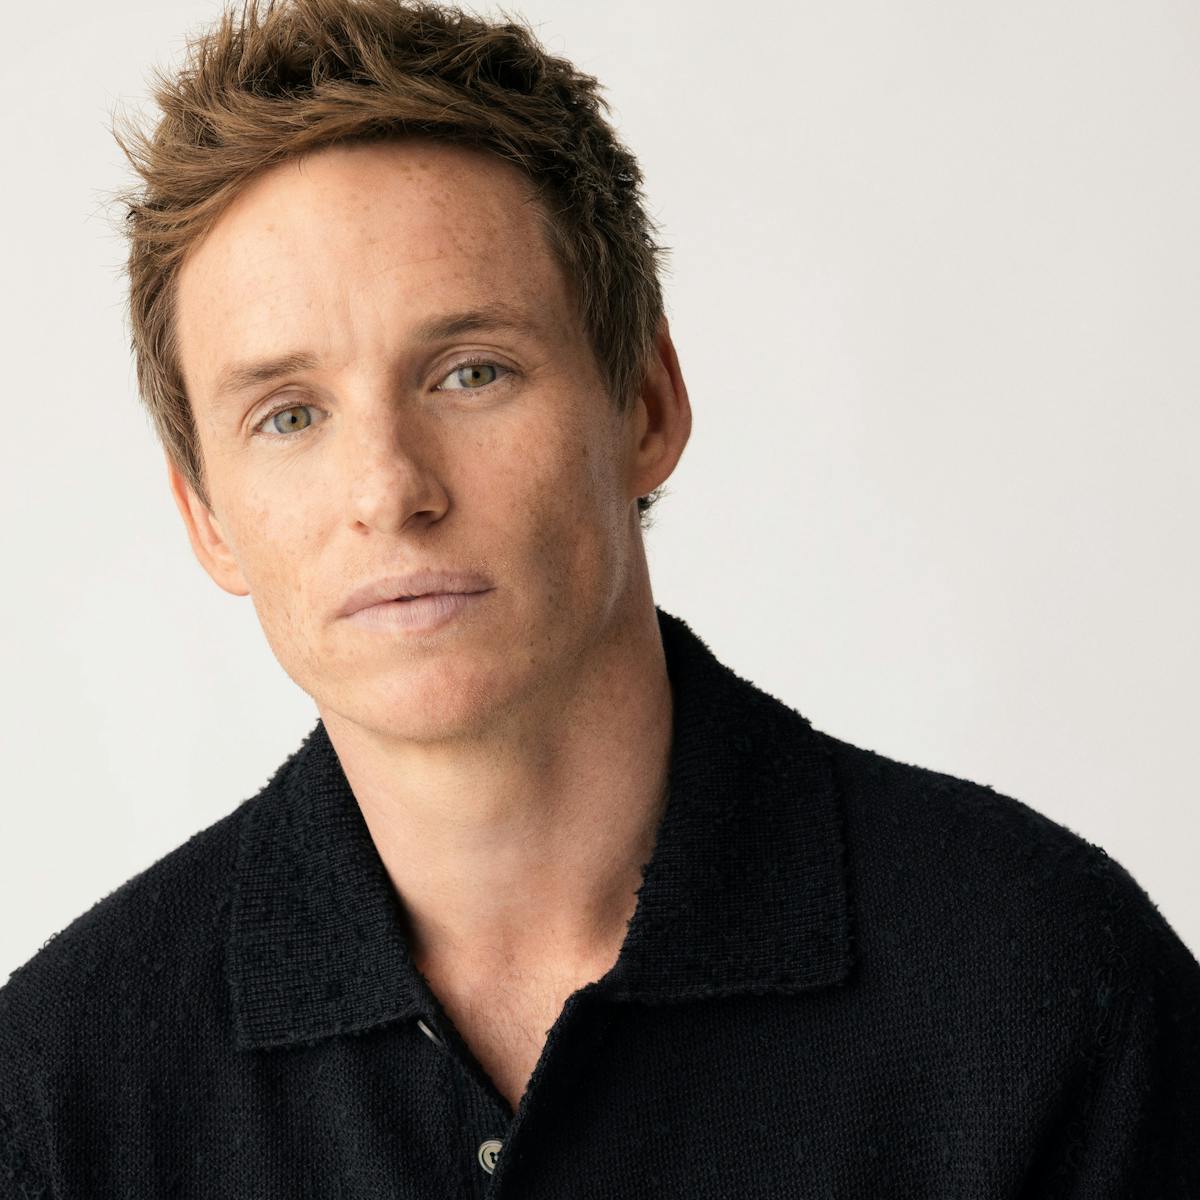 Eddie Redmayne wears a dark shirt and poses against a white background.